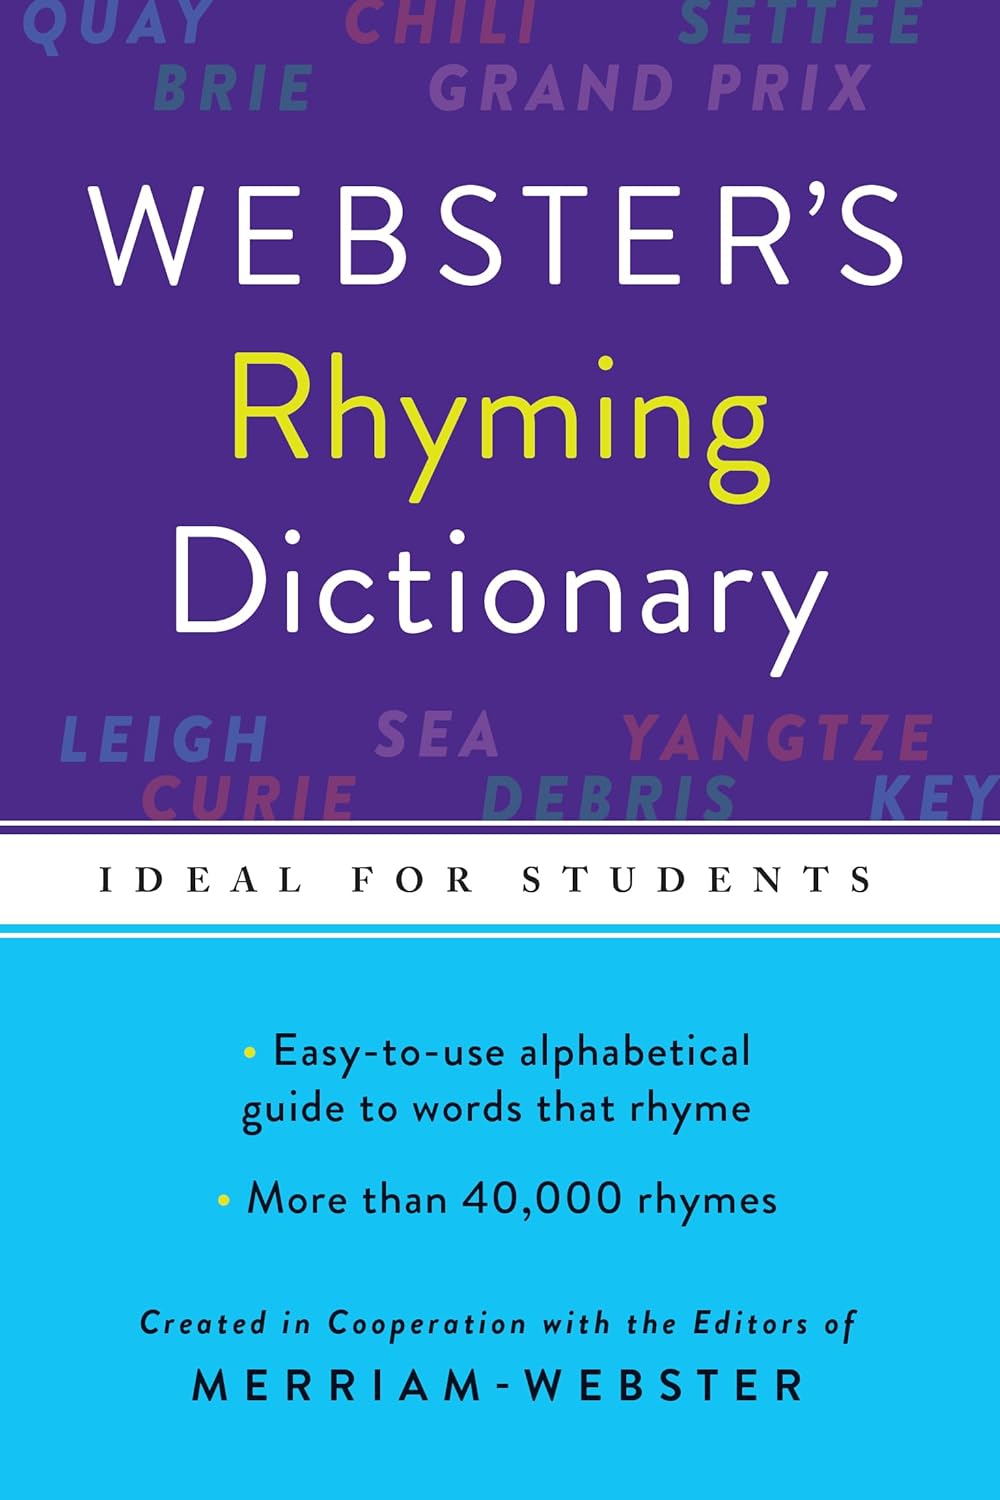 Websters Rhyming Dictionary - CA Corrections Bookstore